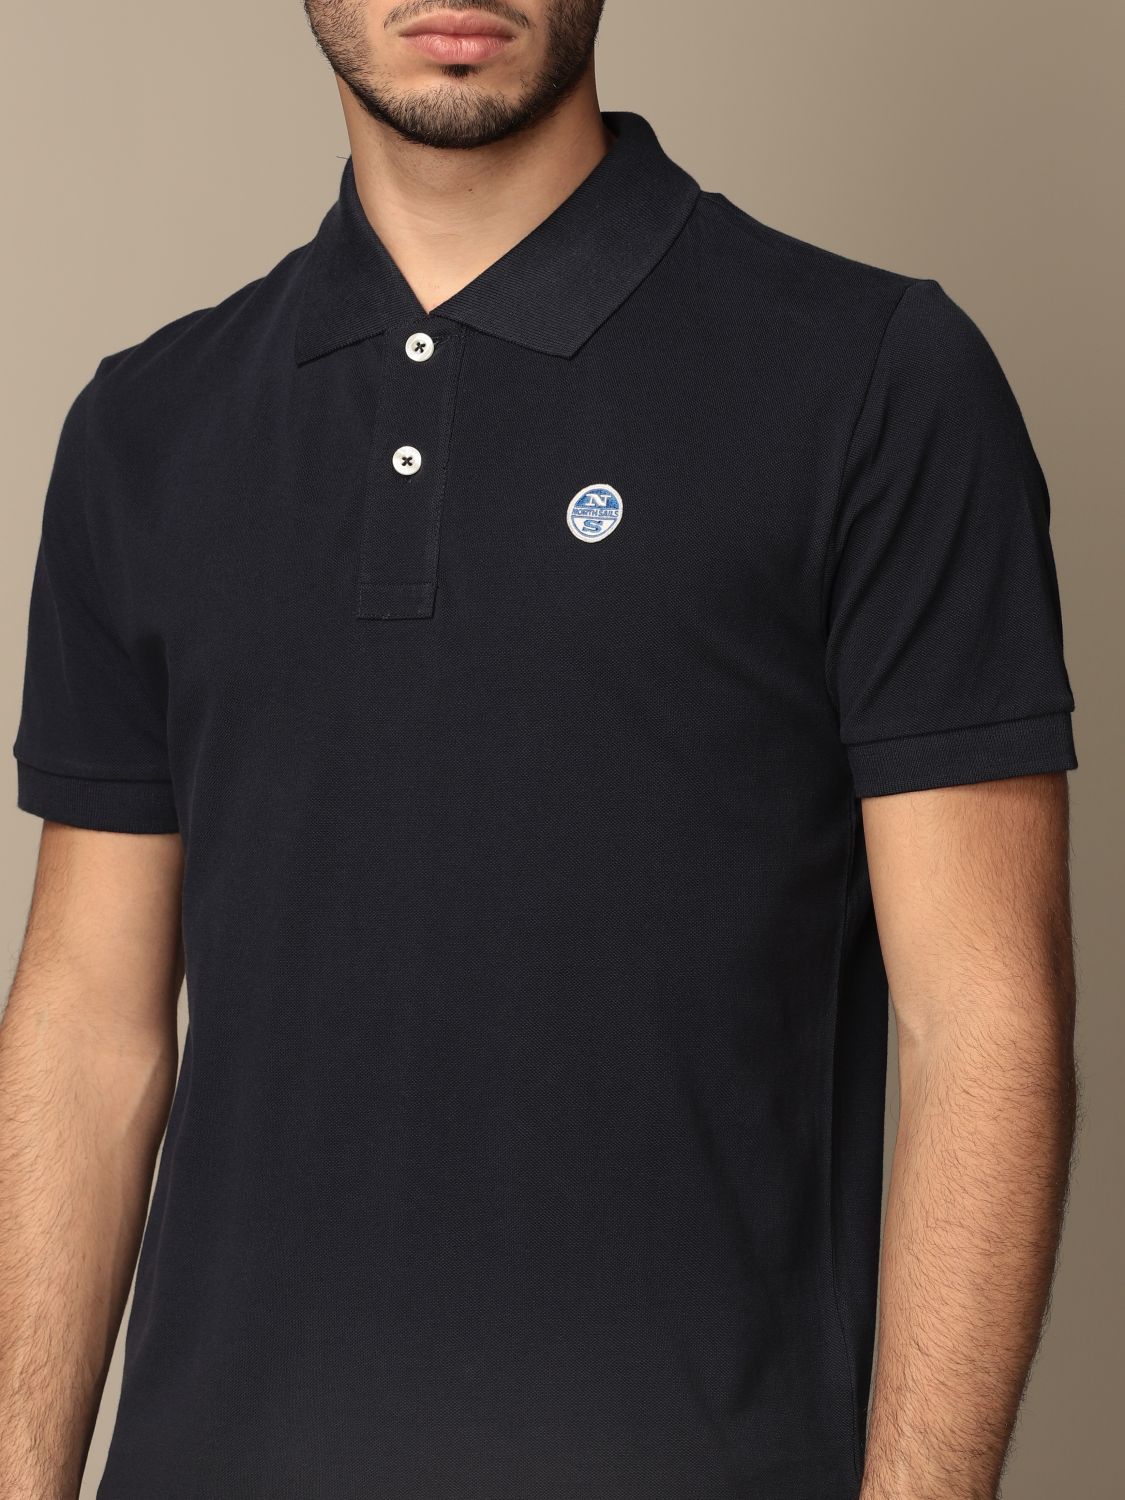 Polo shirt North Sails: North Sails polo shirt in cotton with logo navy 3